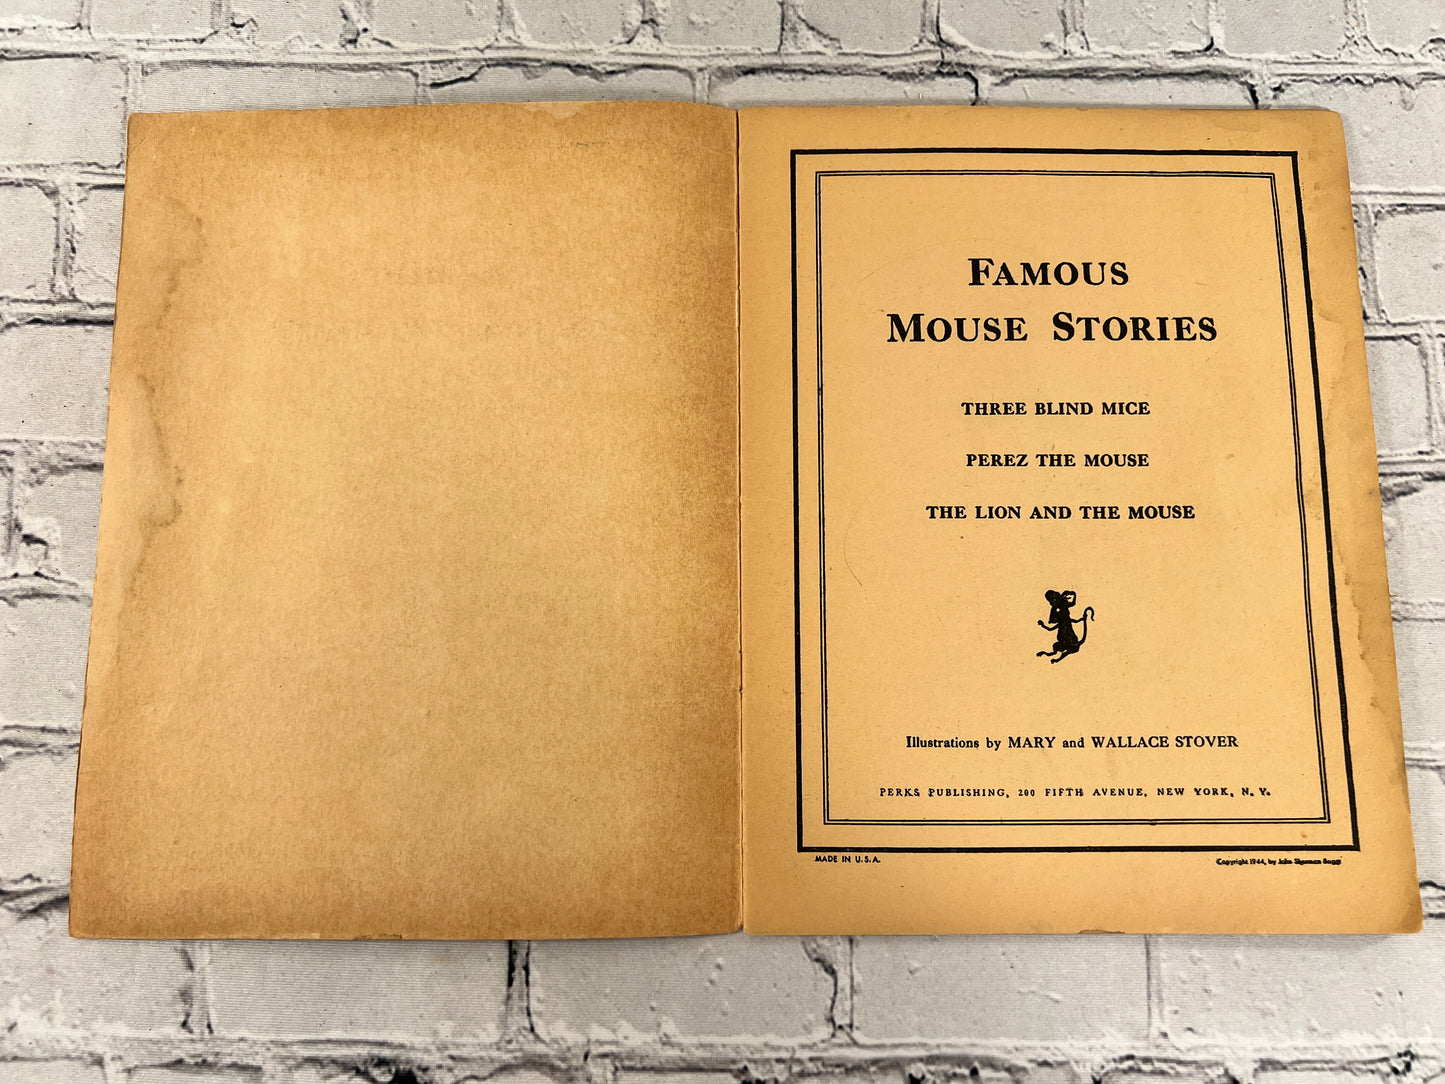 Famous Mouse Stories & Famous Chicken Stories [1944]